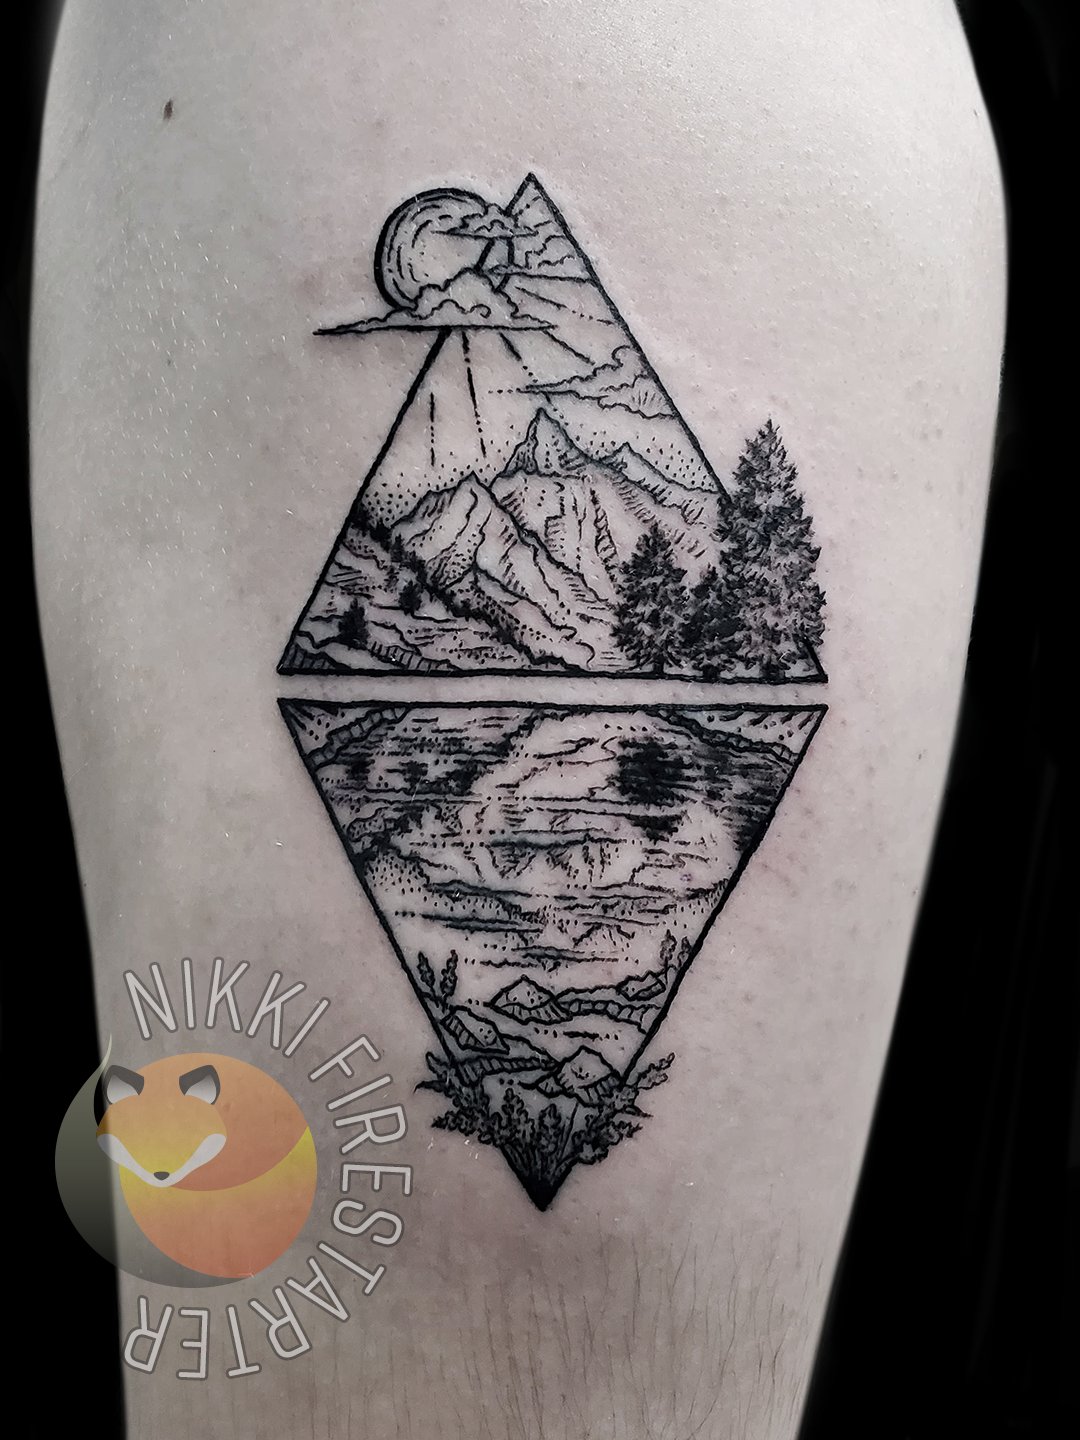 Man of Constant Sorrows on Twitter Triangles amp nature geometry  GeometricTattoo NatureTattoo nature mountains trees reflection  BlackTattoo GraphicTattoo GraphicArt DotWork tattoos BodyArt BodyMod  modification ink art 